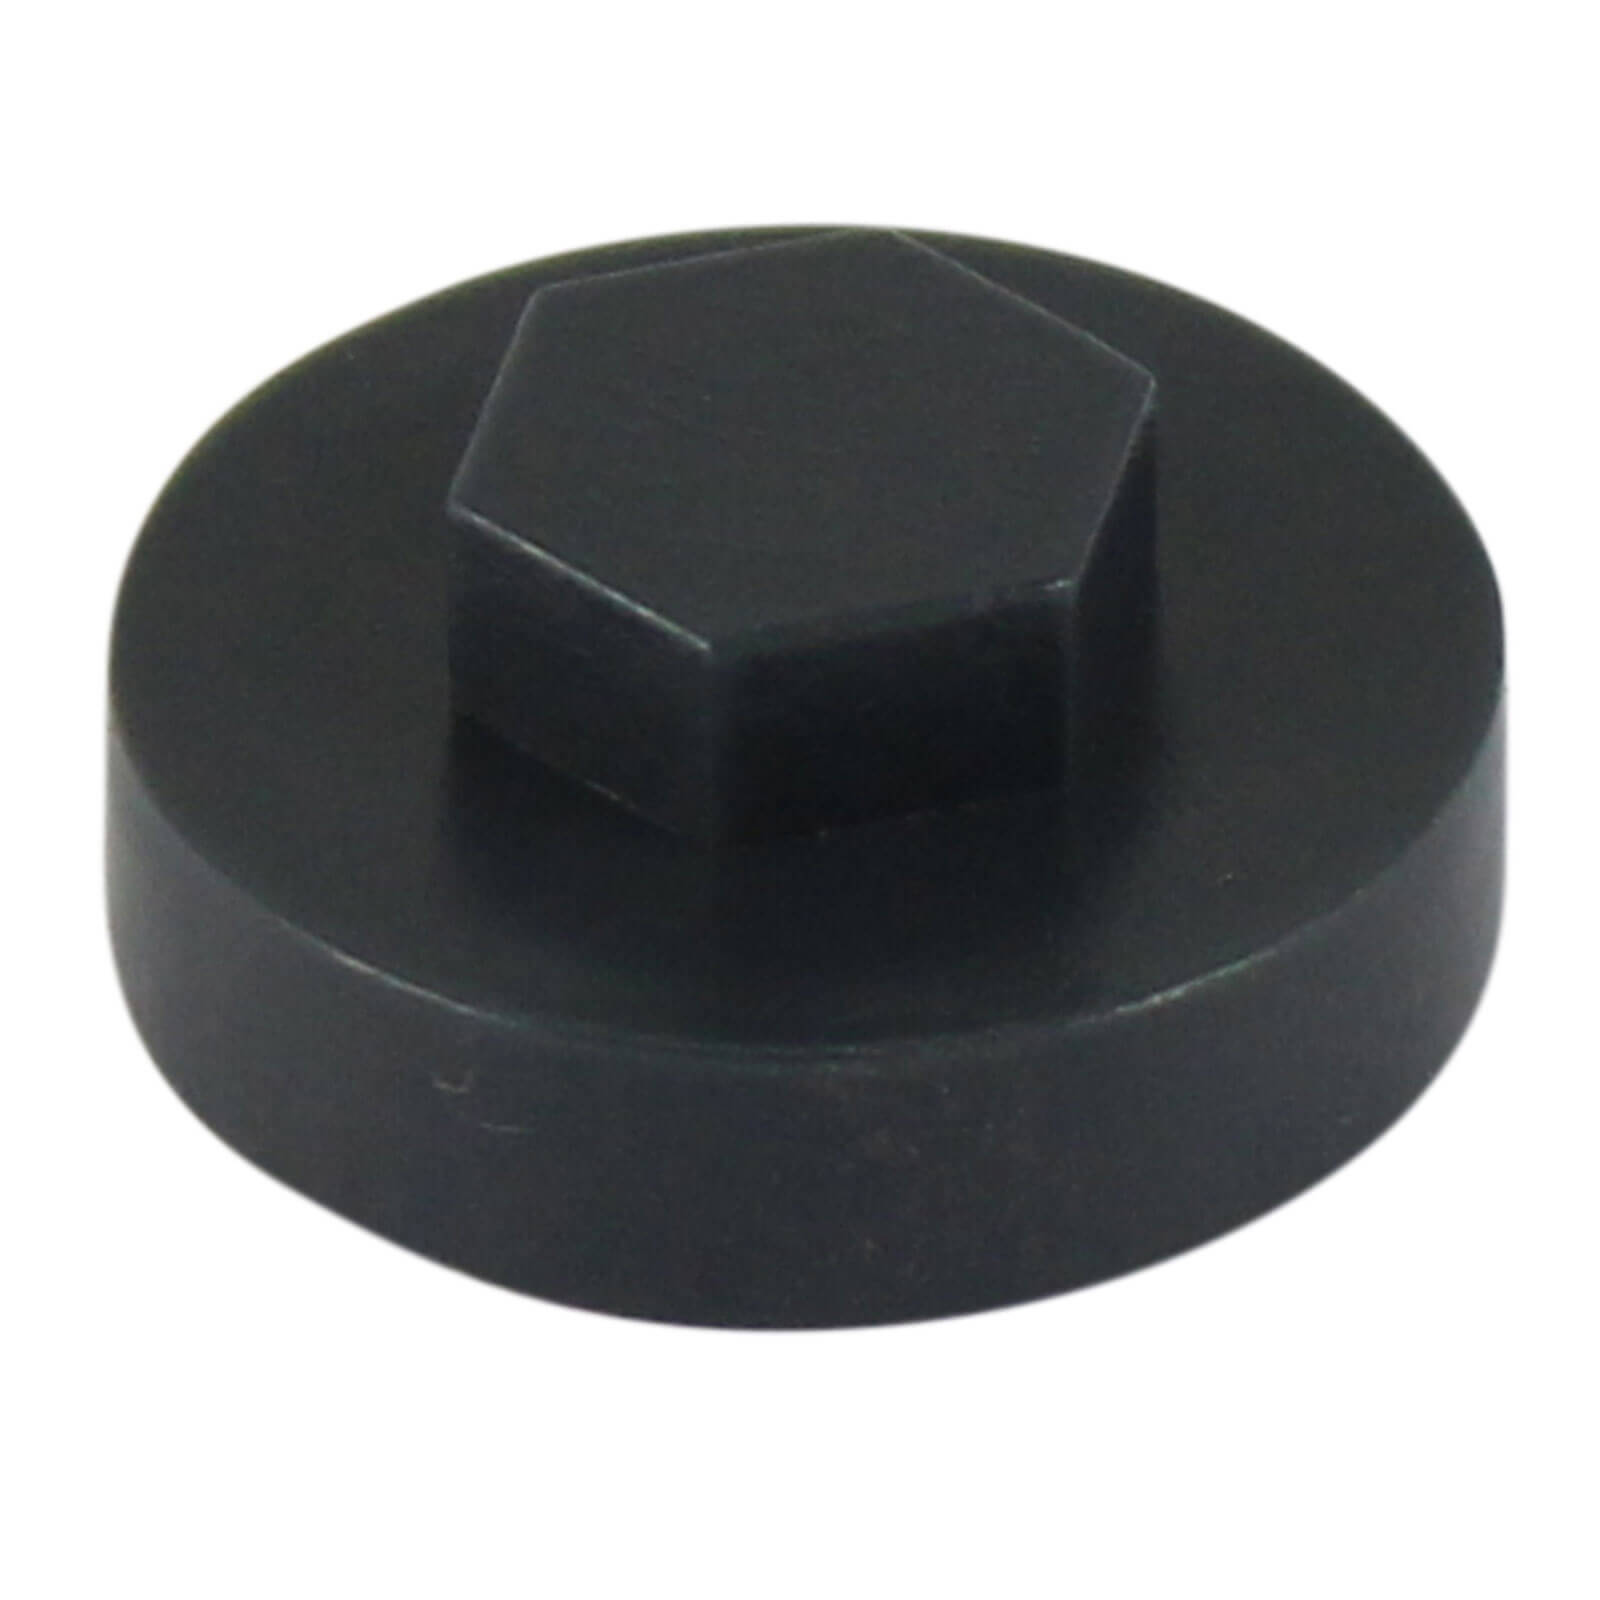 Image of Colour Match Hexagon Screw Cover Cap 5/16" x 16mm Anthracite Pack of 1000